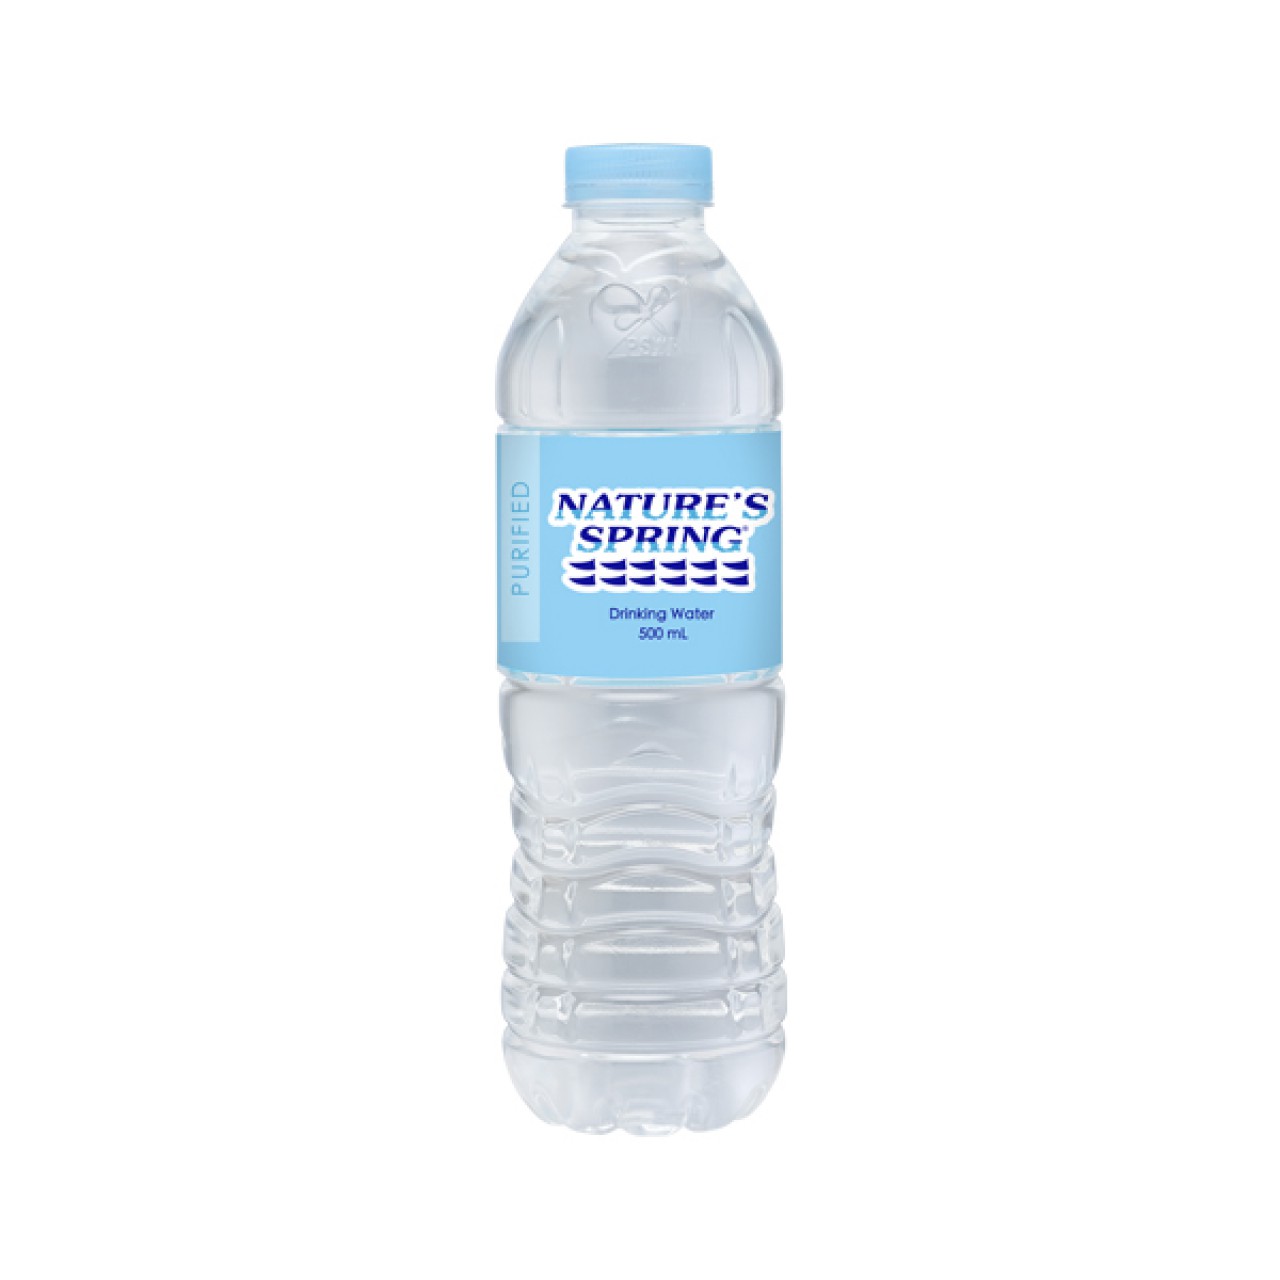 NATURE SPRING DRINKING WATER PURIFIED 500ML